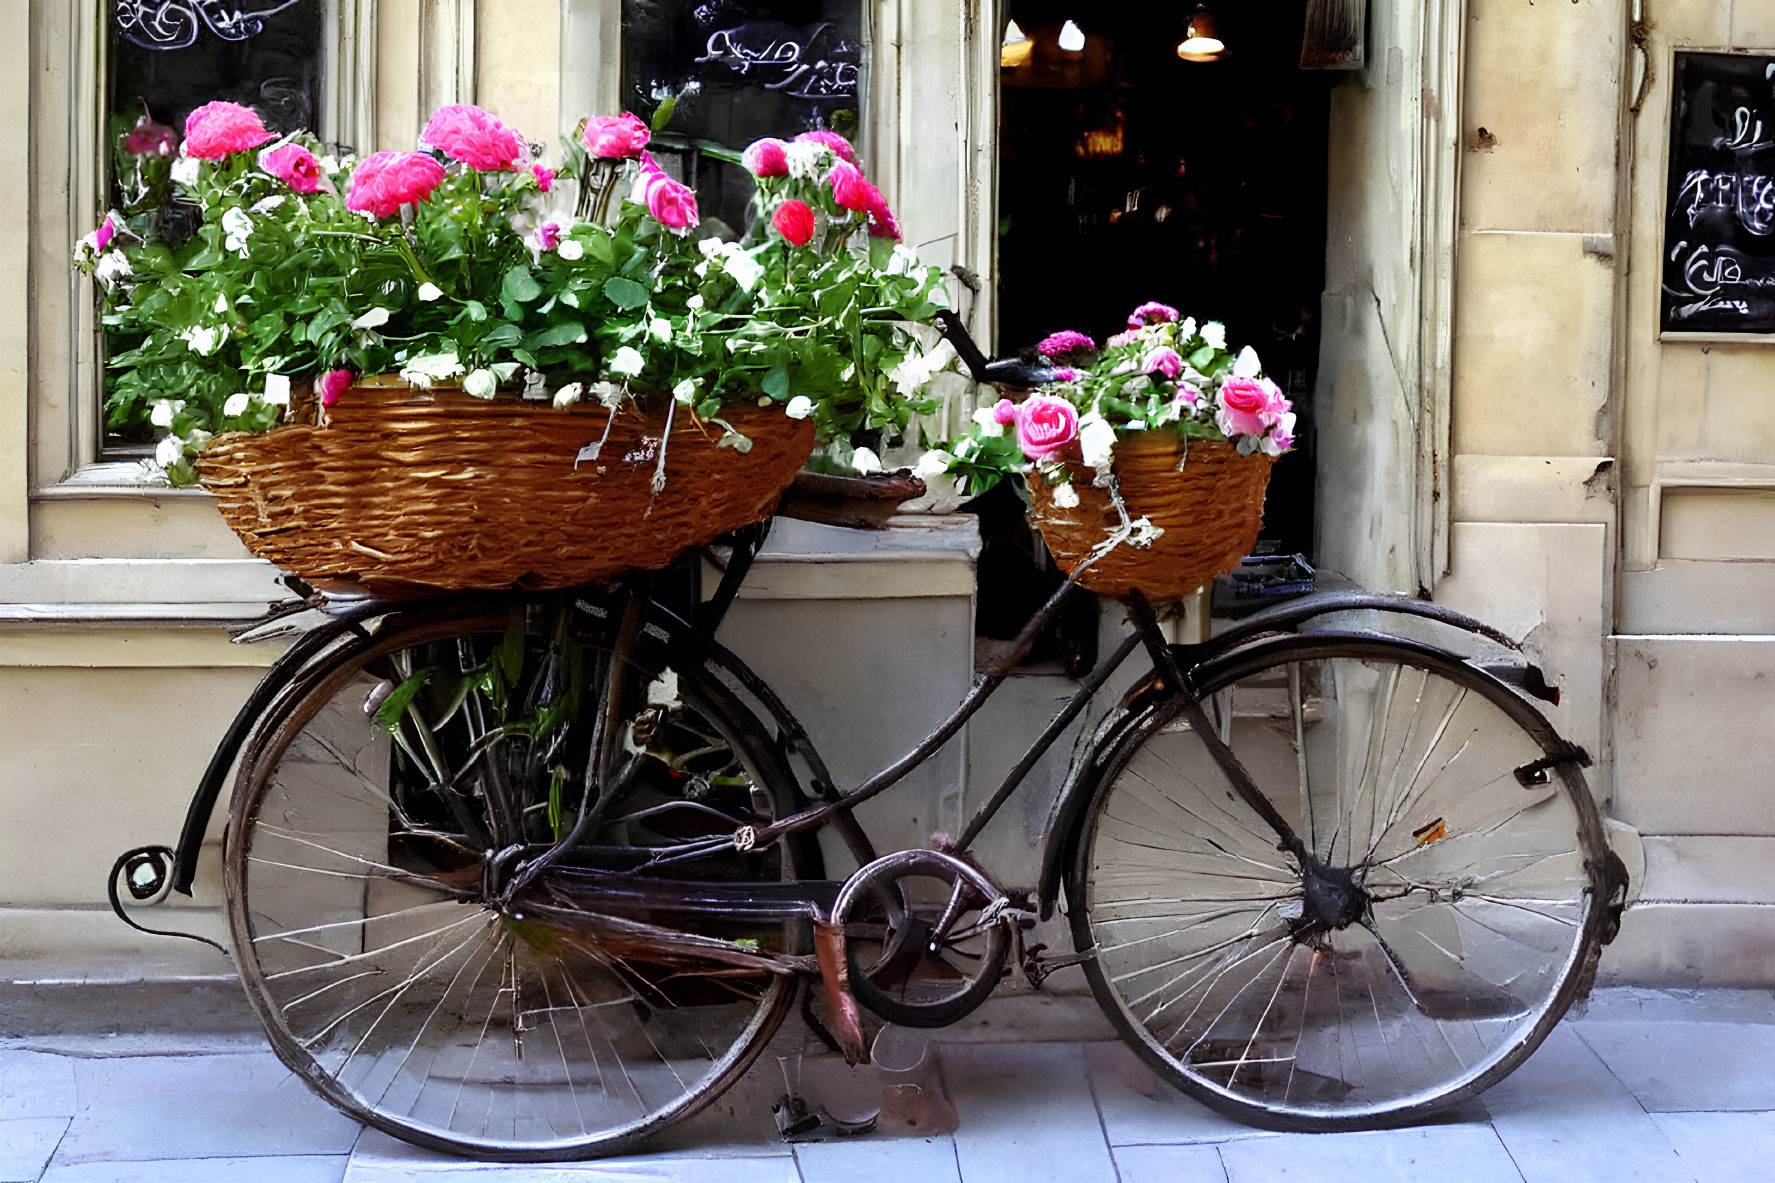 Vintage Bicycle with Wicker Baskets and Pink Flowers by Window Reflections